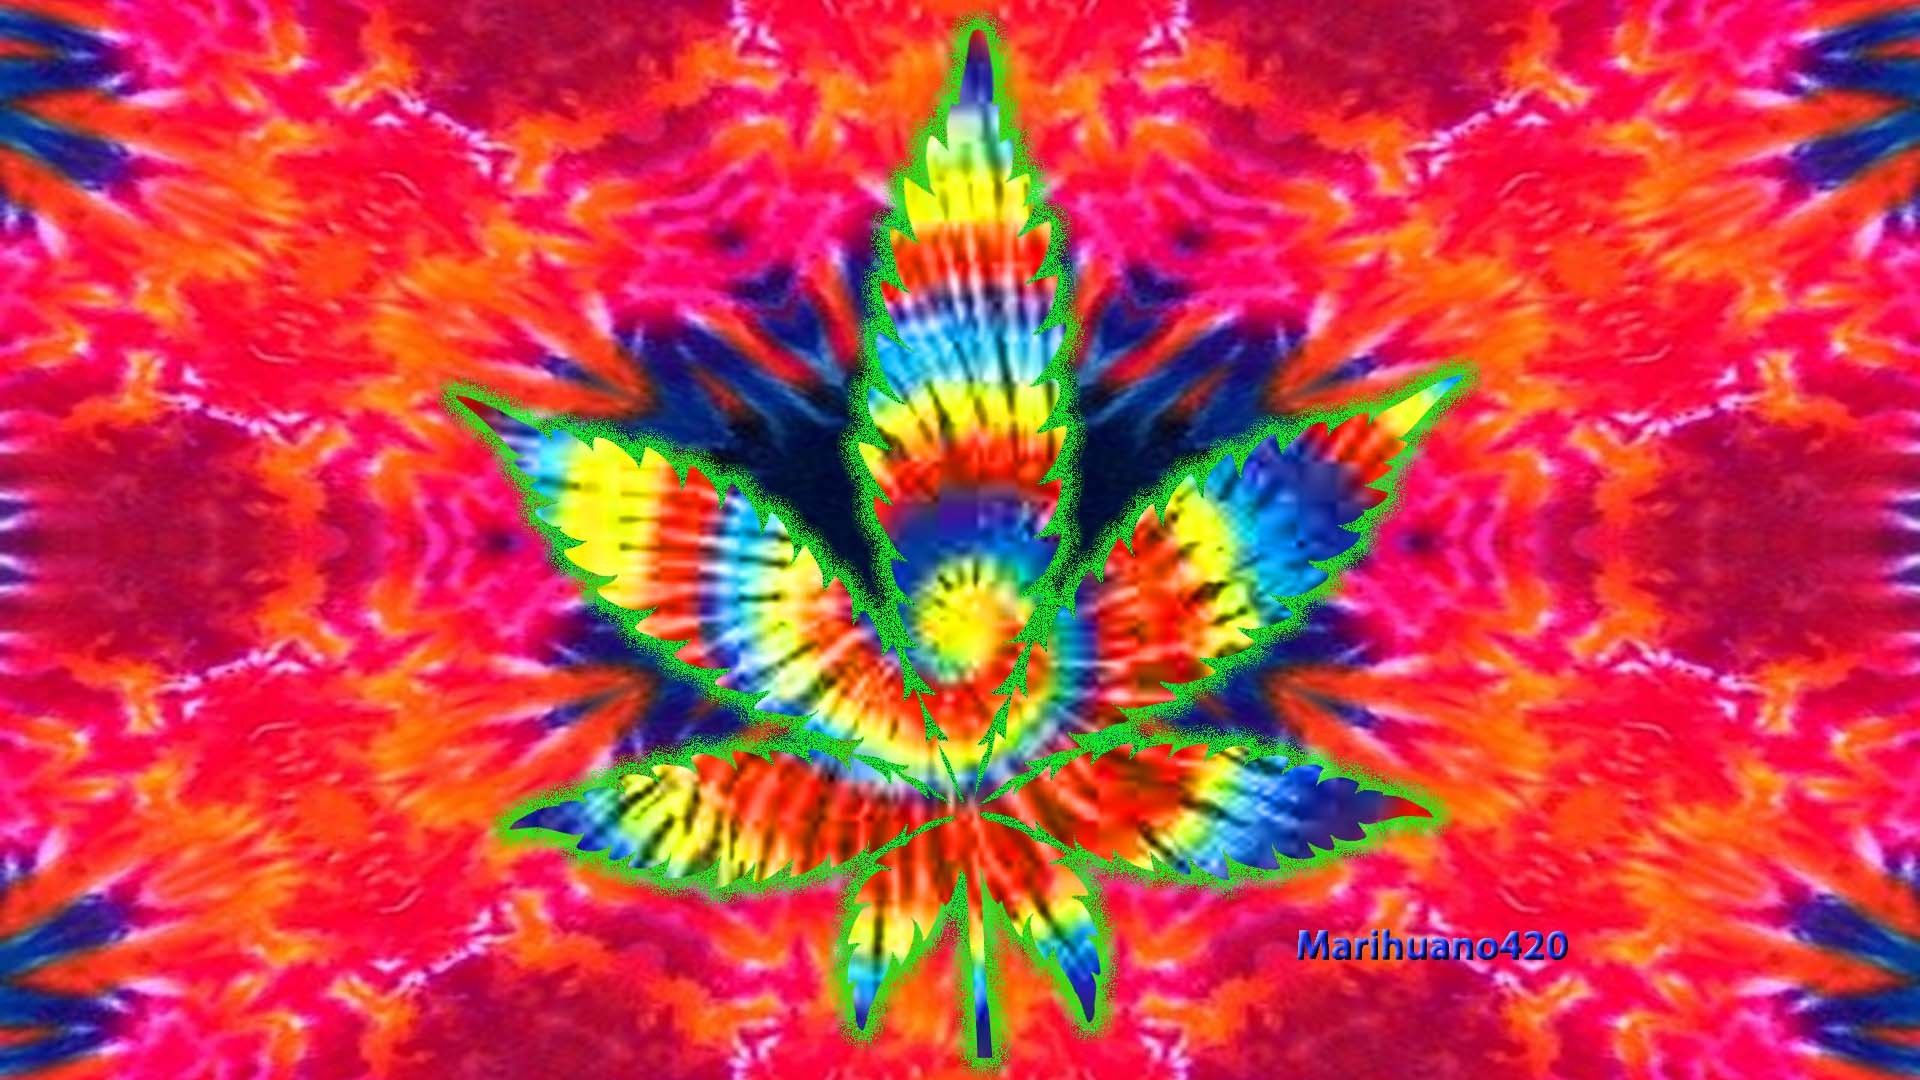 Stoner Hippies Wallpapers   Top Free Stoner Hippies Backgrounds